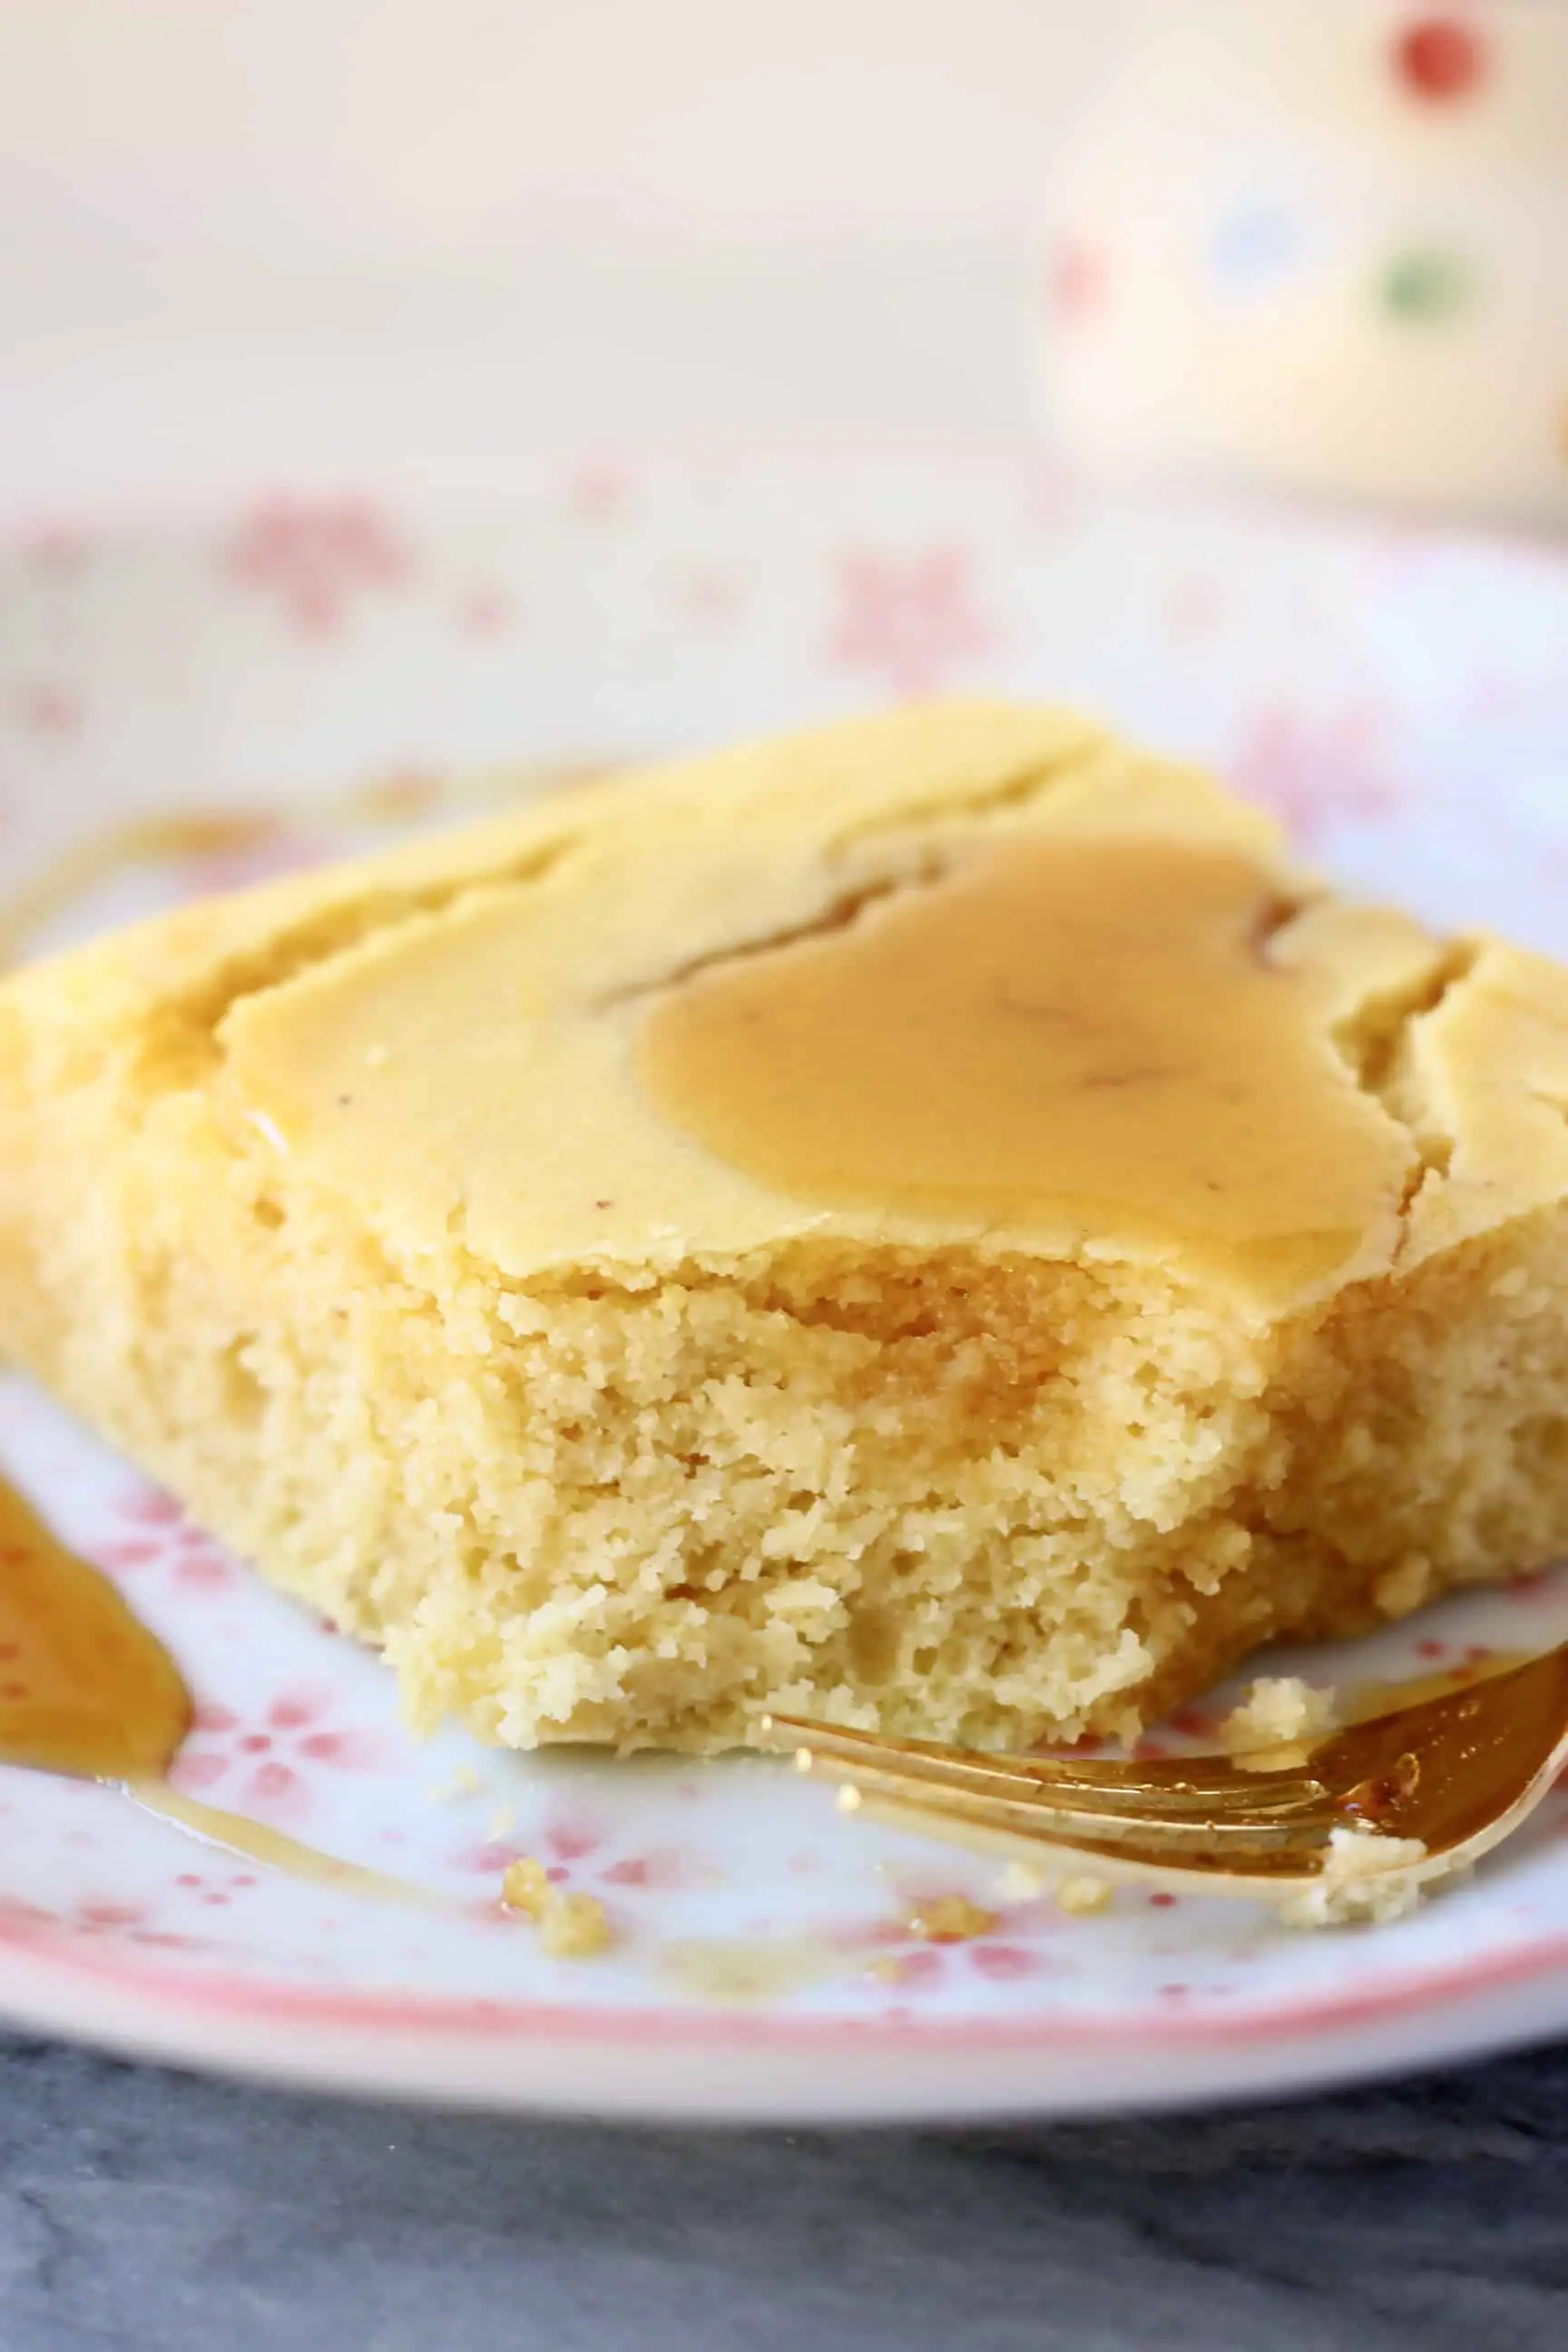 A square of cornbread with a bite taken out of it drizzled with maple syrup on a white plate with pink flowers and a gold fork